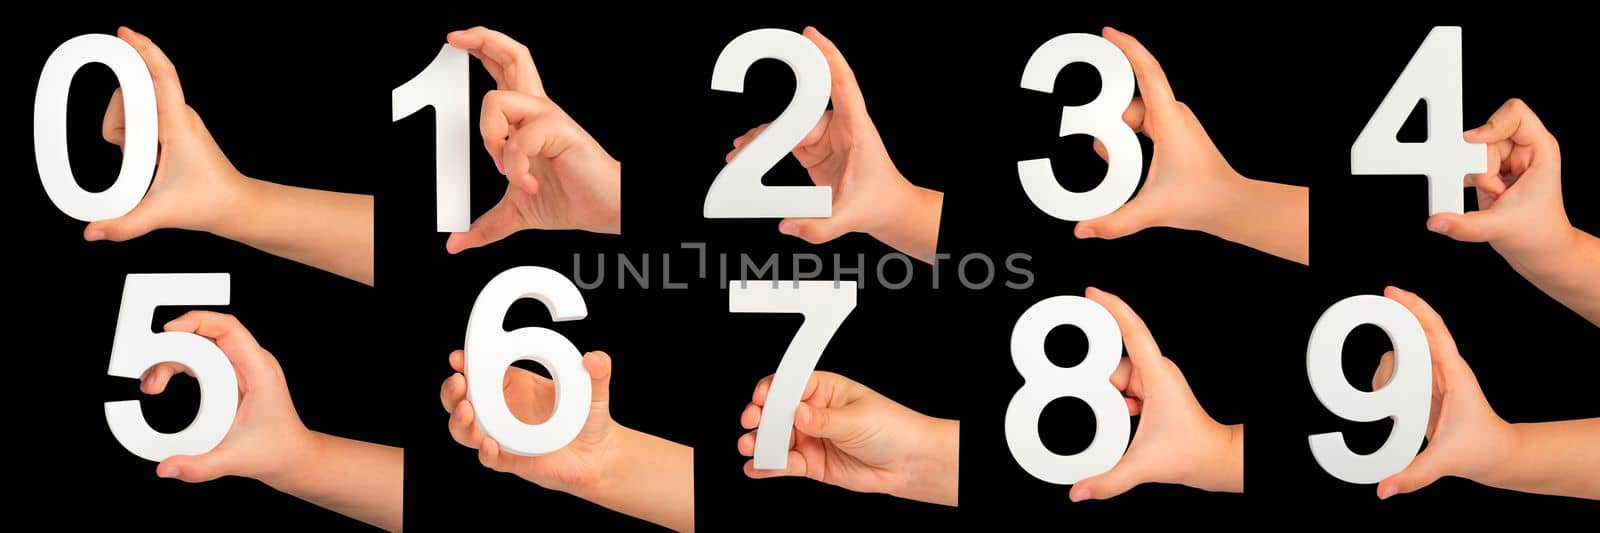 Children's hands hold numbers. A set of white numbers in hands on a black isolated background. Zero, one, two, three, four, five, six, seven, eight, nine